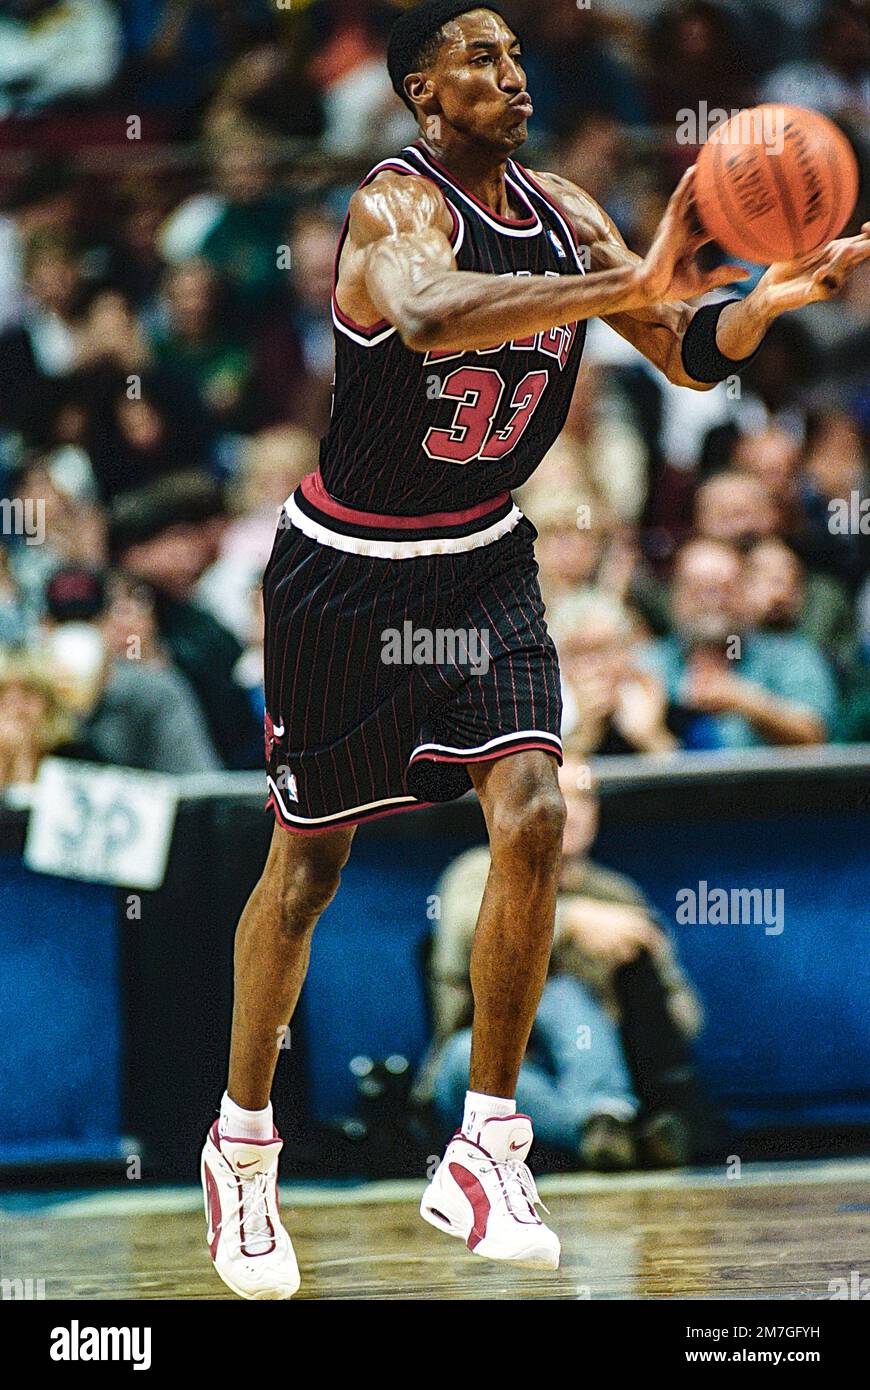 Chicago Bulls forward Scottie Pippen (33) makes a move with the basketball  against the Seattle Super Sonics during an NBA game. Nov. 15, 2003 in  Chicago. (Kevin Reece via AP Stock Photo - Alamy